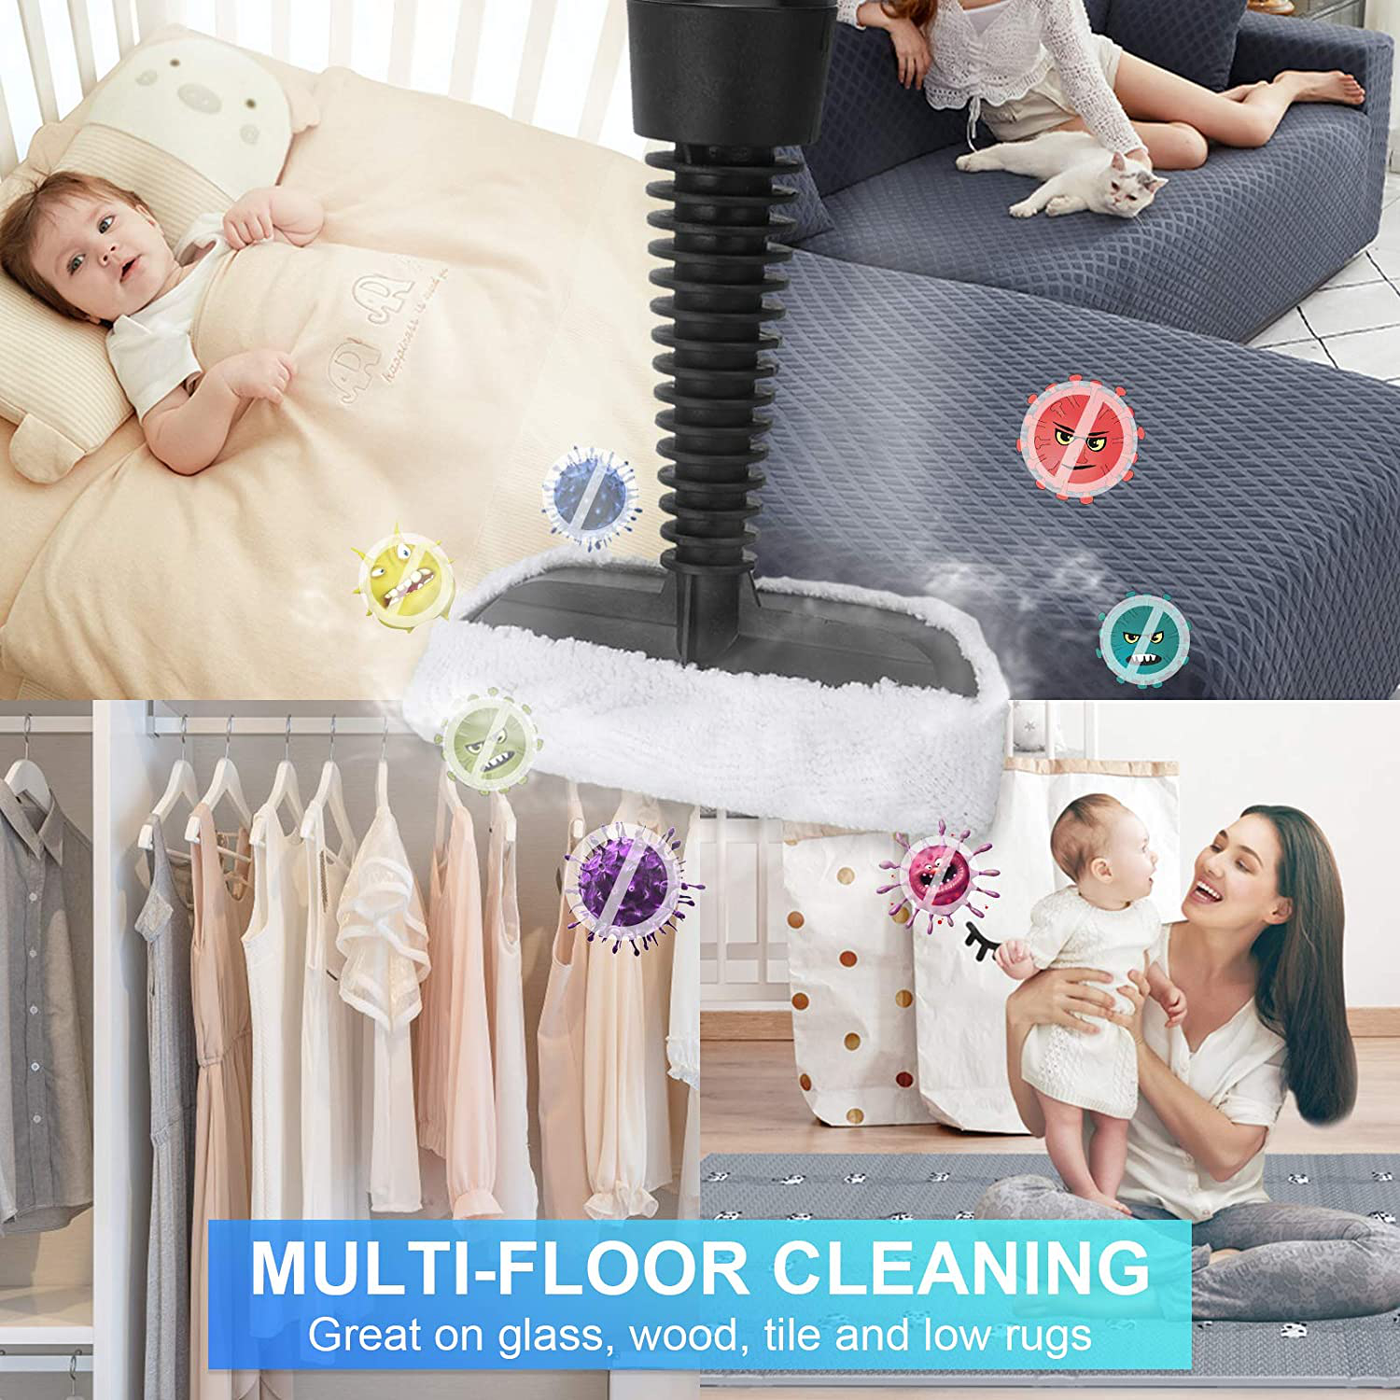 MLMLANT Steam Cleaners,Handheld Steamers Cleaning, Multi Purpose Portable Grout,450milliliter Tank Capacity, for Upholstery Sofa Curtain Shower Carpet Window Car Tile Kitchen Patio Home Use Machine